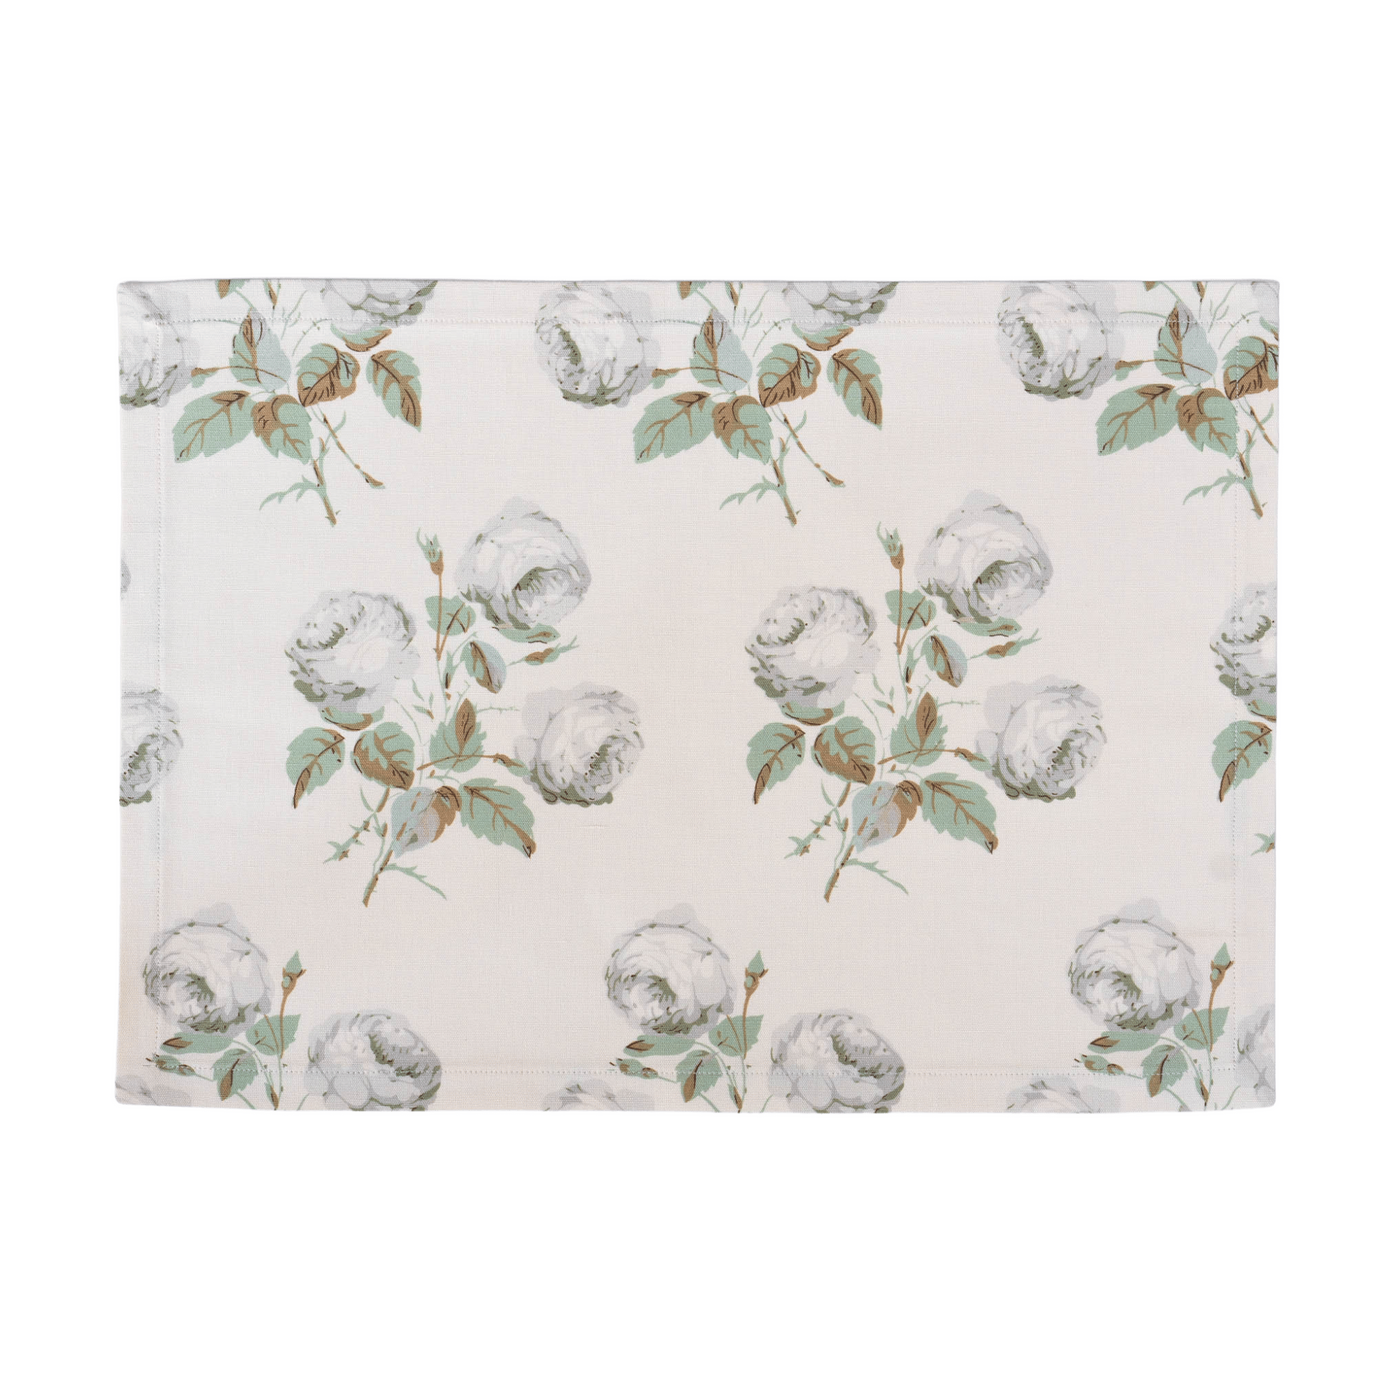 Colefax & Fowler Bowood Union Placemat - Maxine Makes